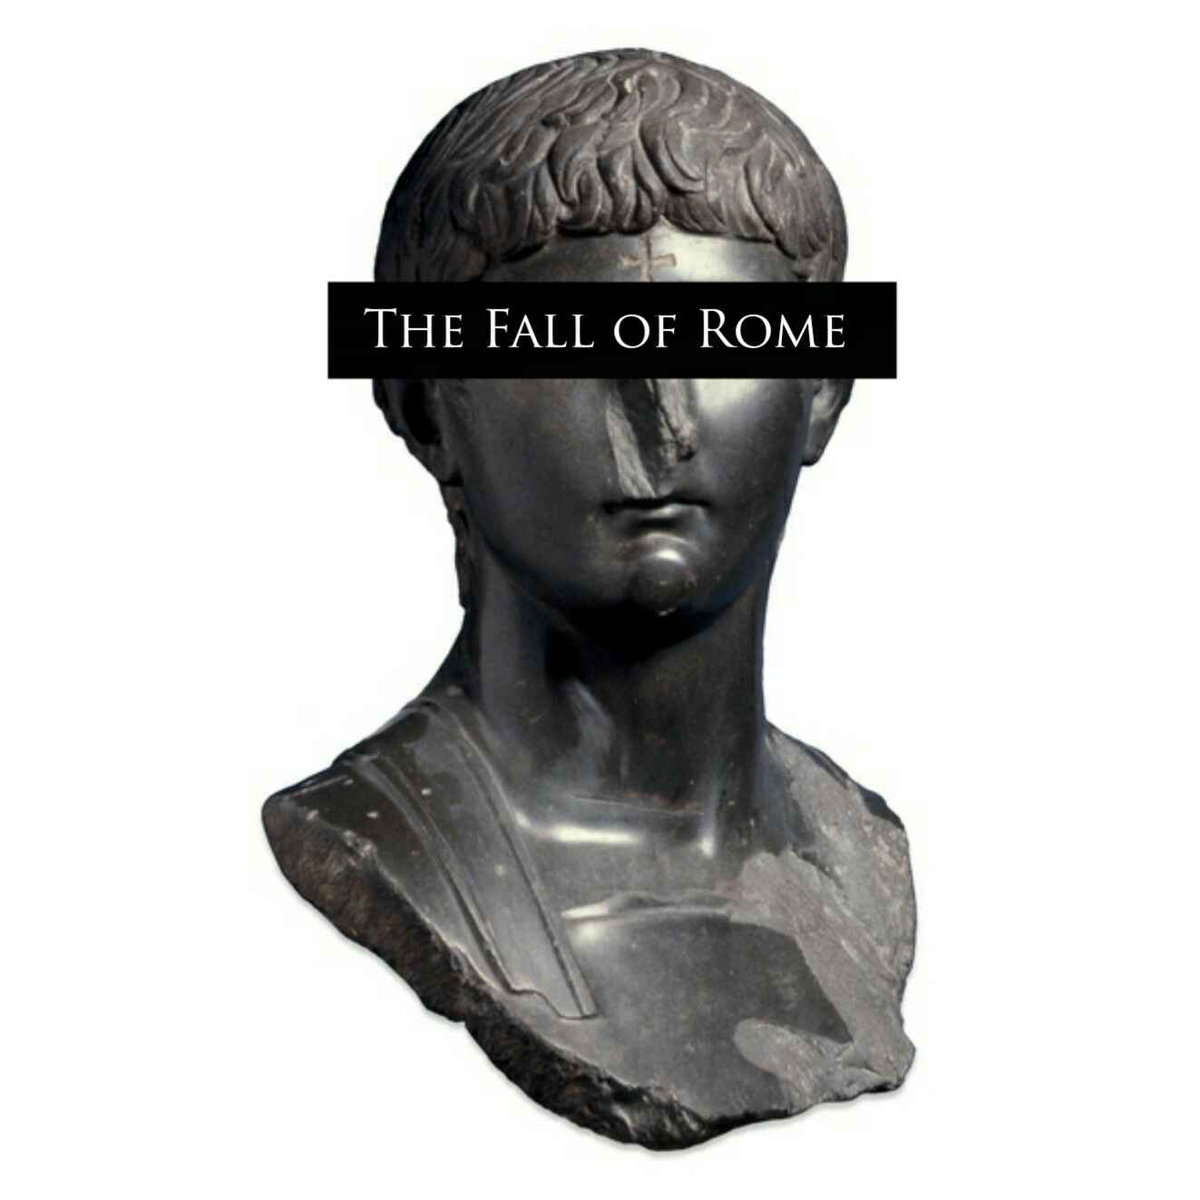 Peach releases new album  The Fall of Rome